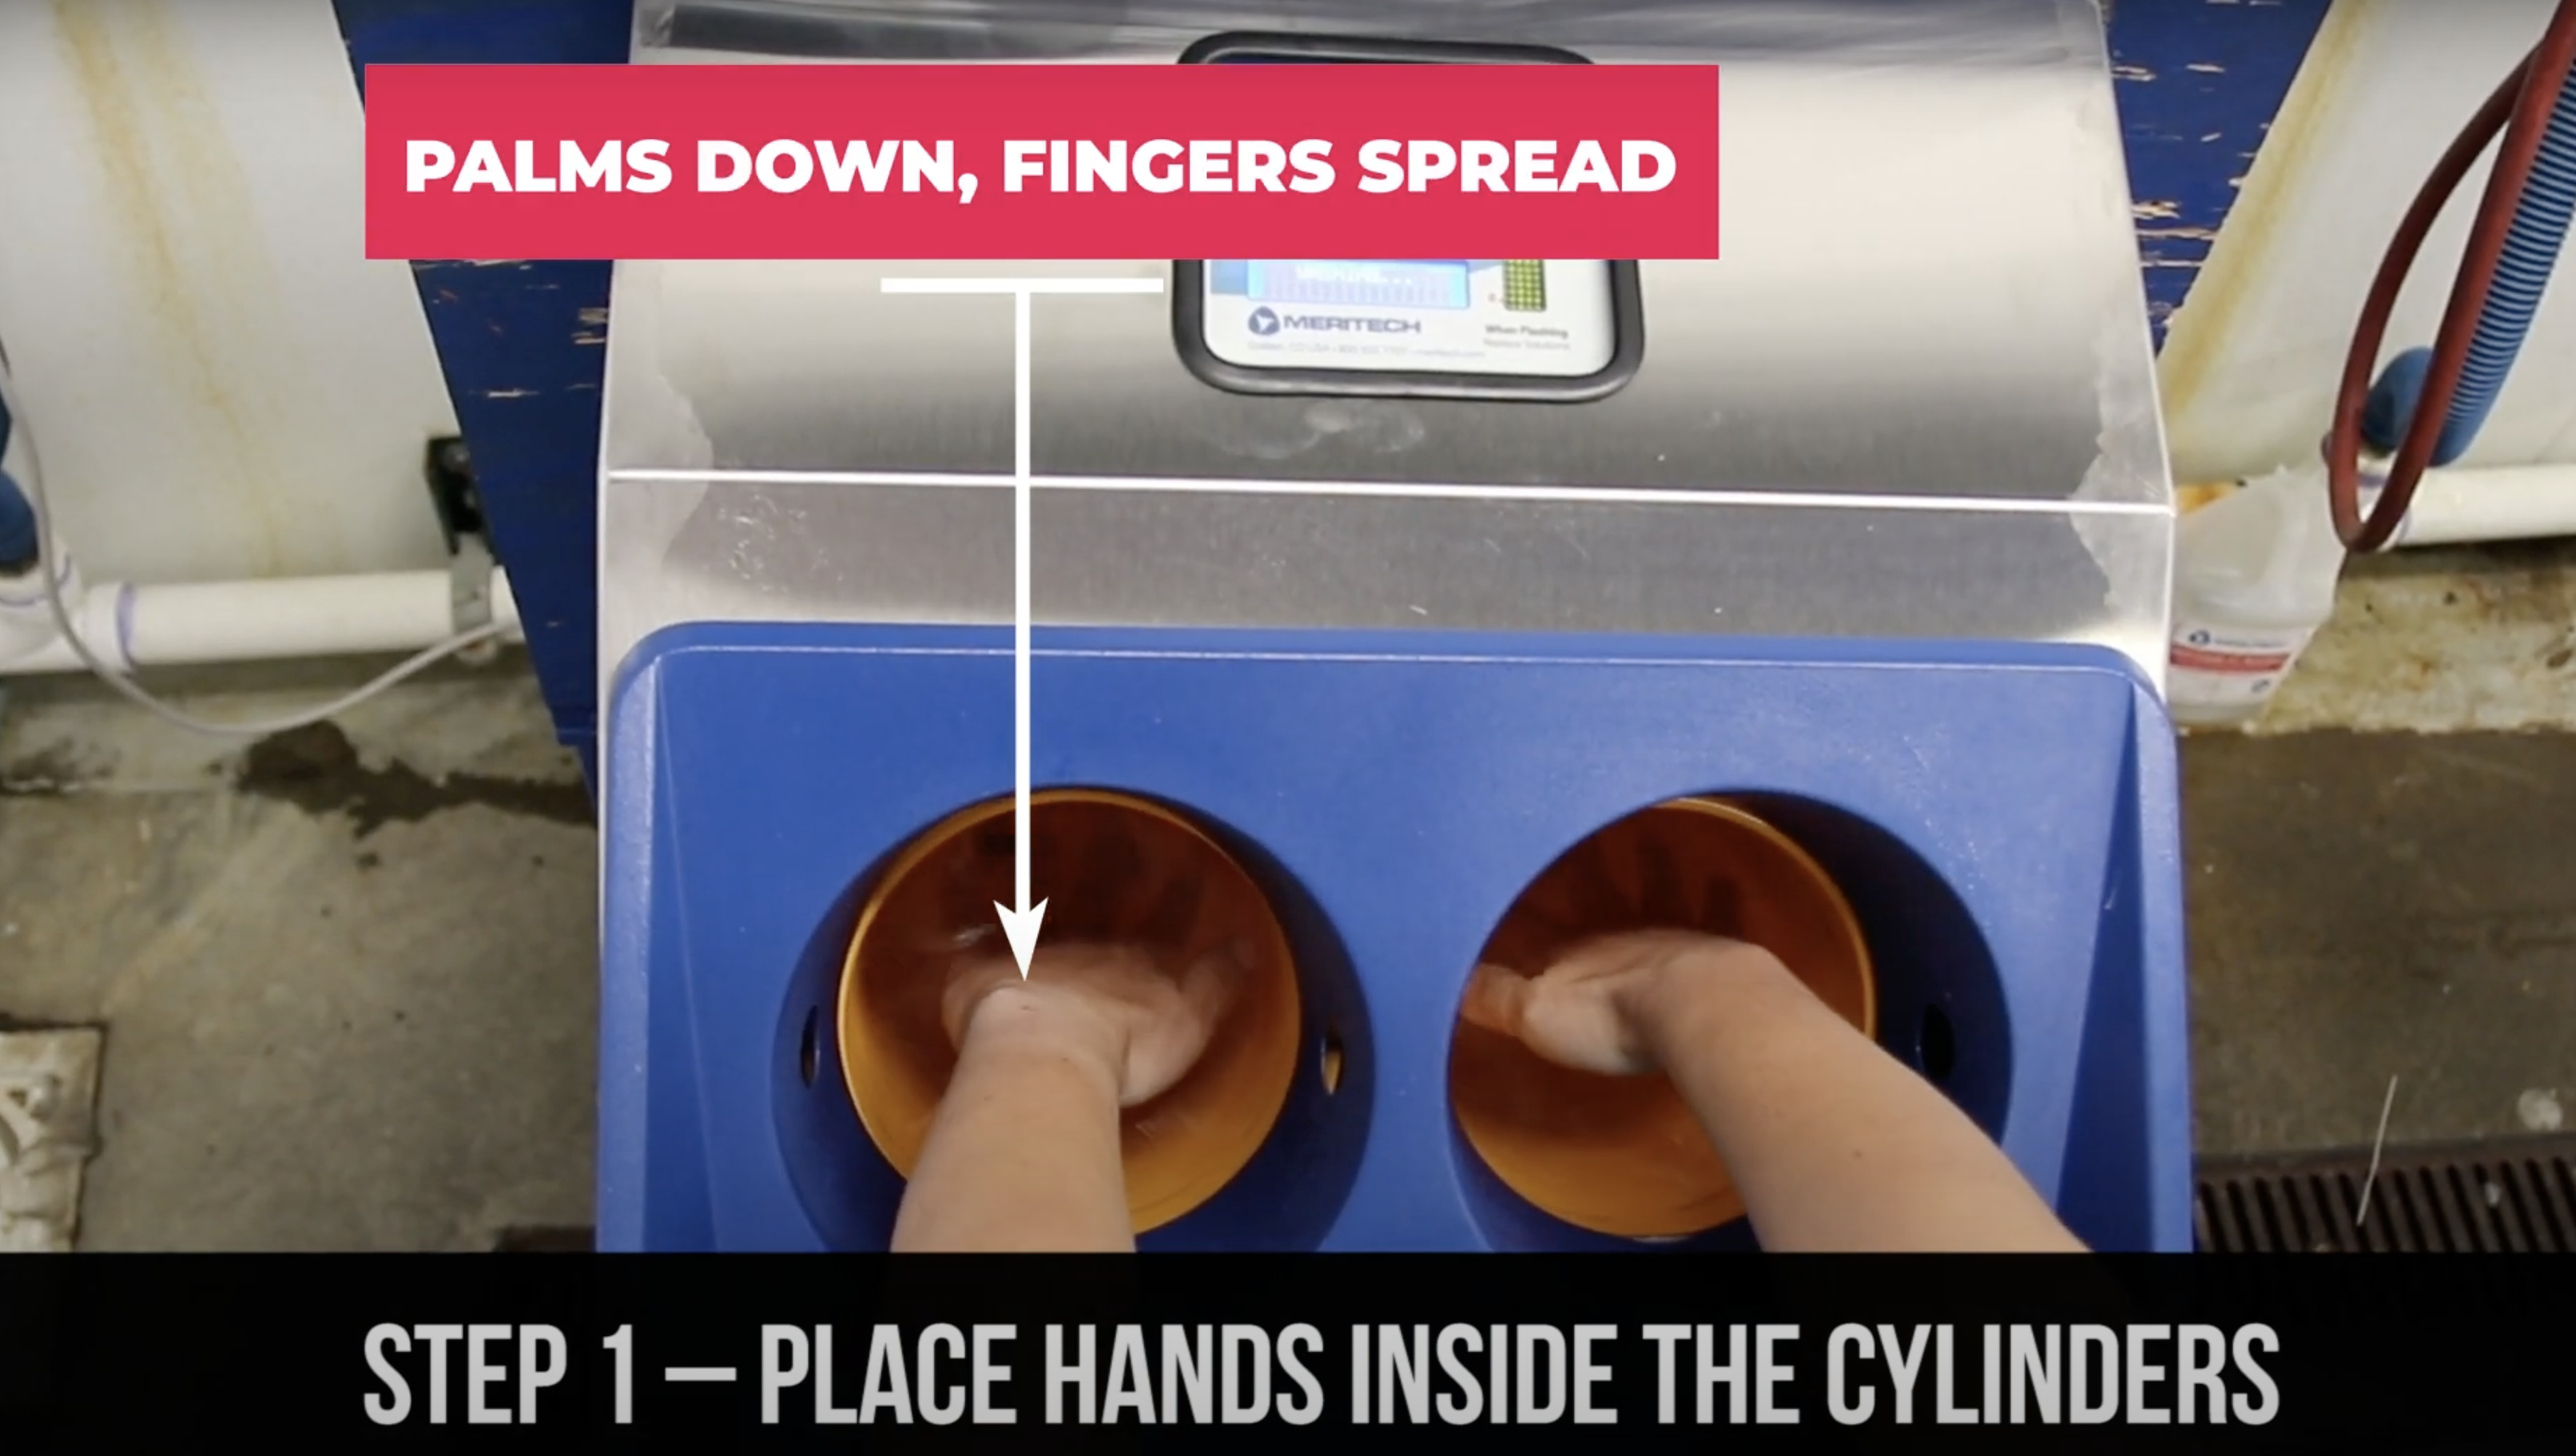 How to Use a CleanTech® Automated Handwashing Station